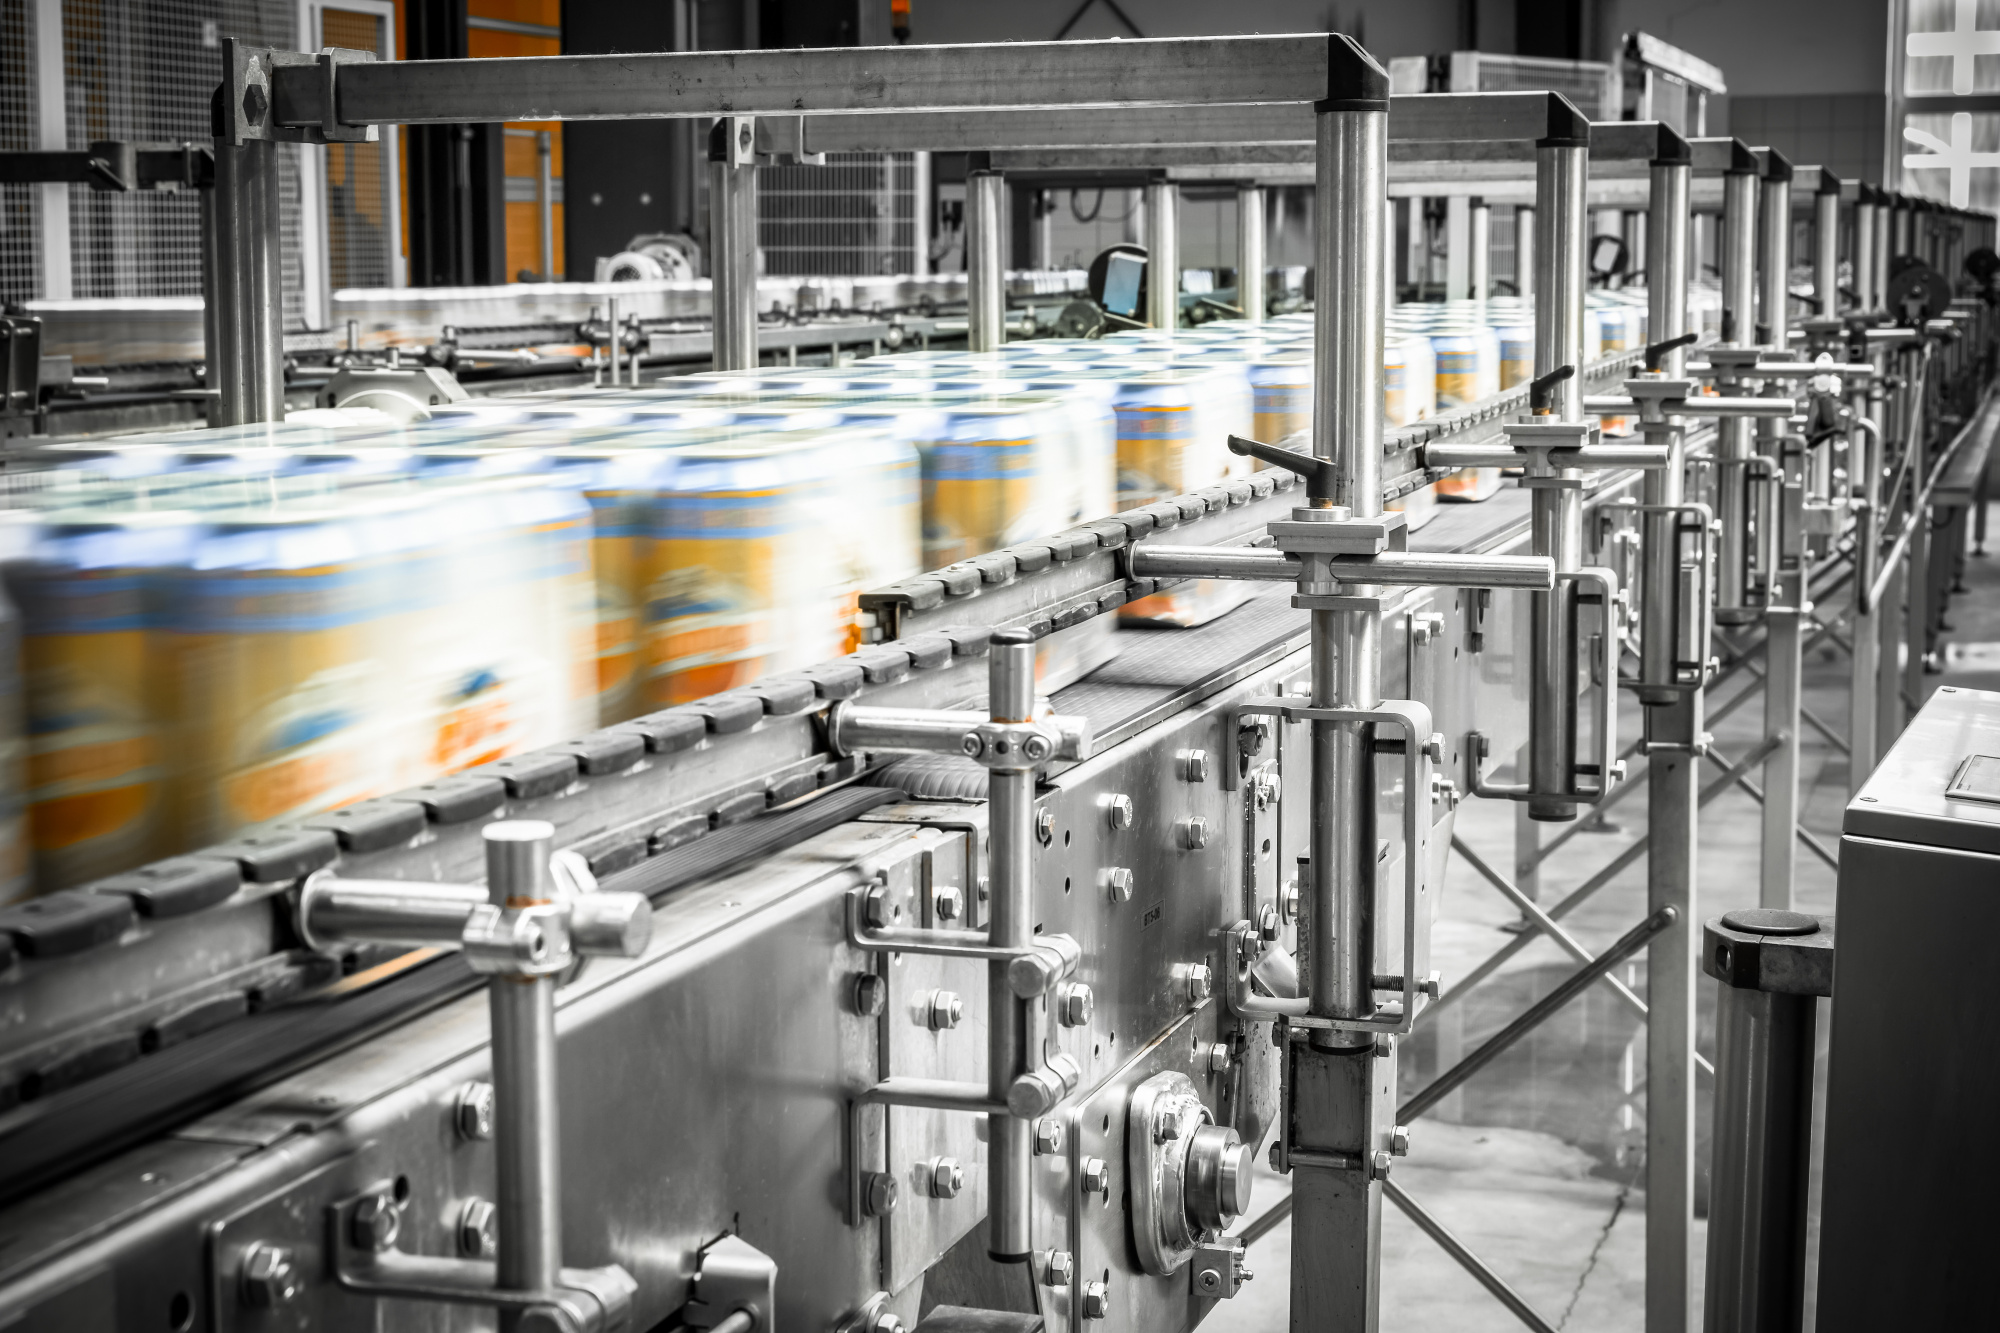 cans lined up for manufacturing